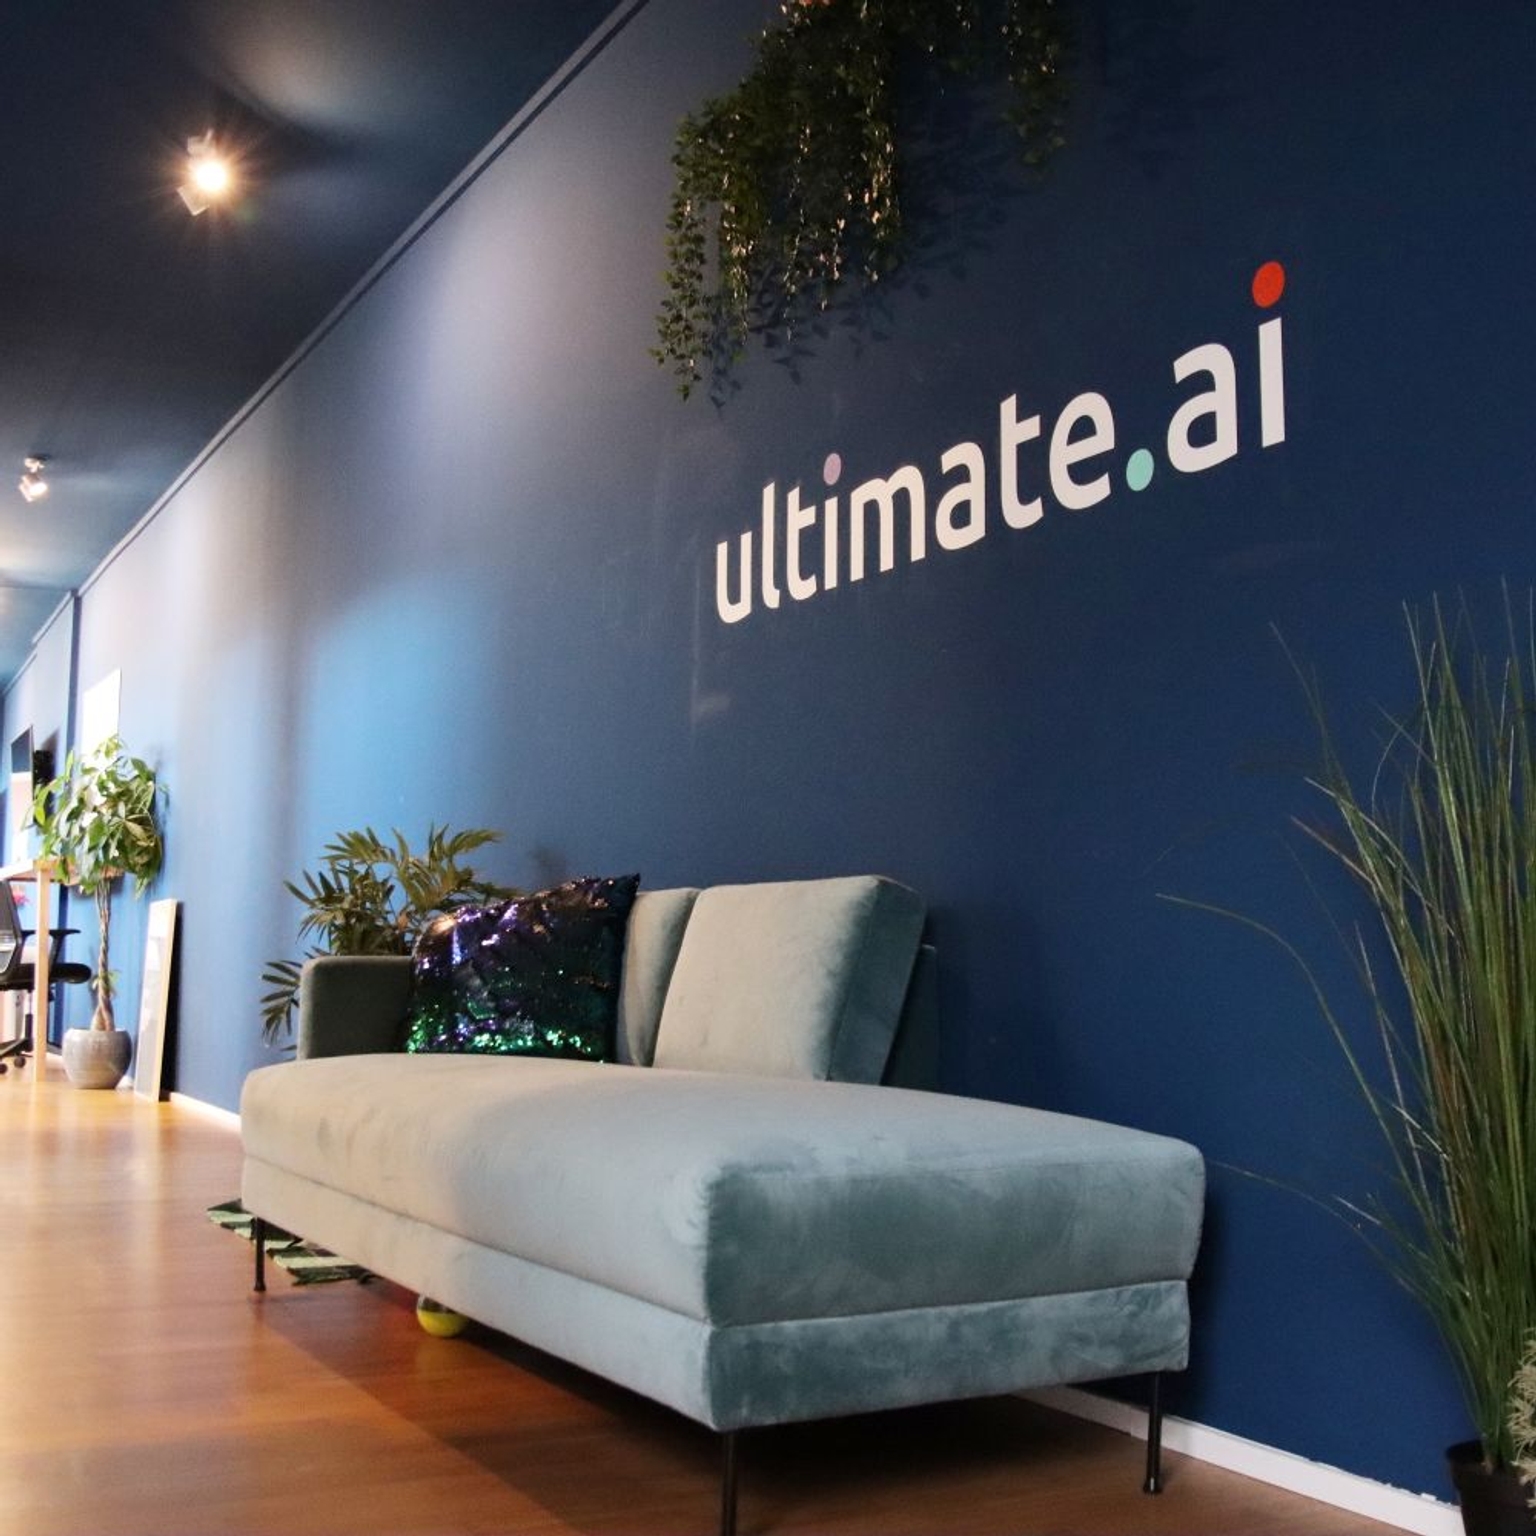 Ultimate.ai office logo by Function & Form